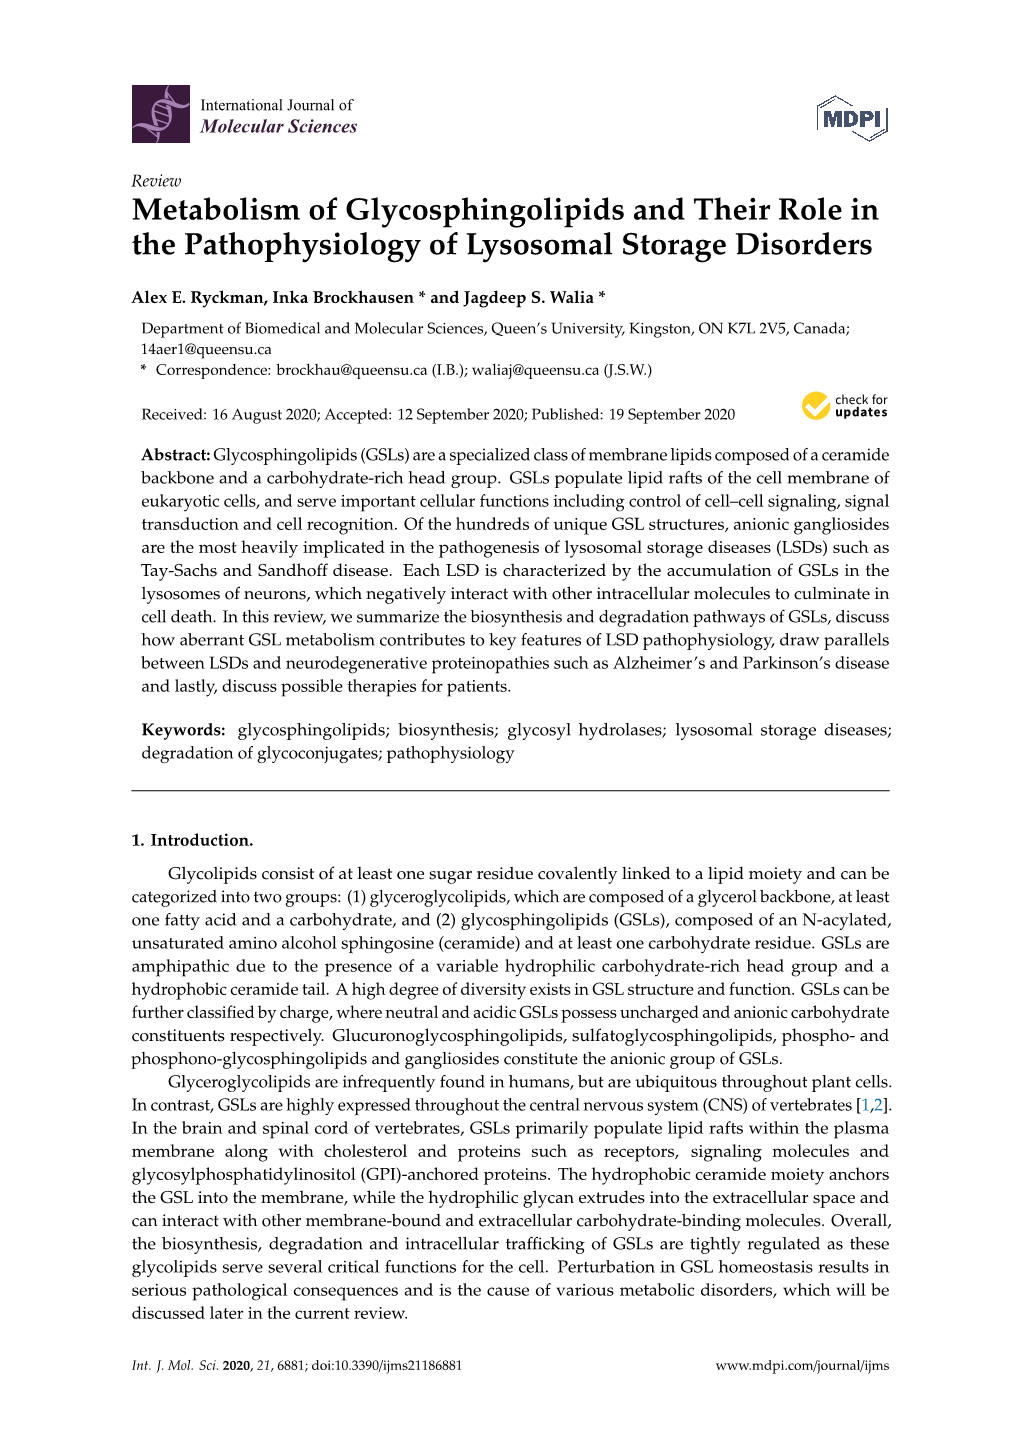 Metabolism of Glycosphingolipids and Their Role in the Pathophysiology of Lysosomal Storage Disorders